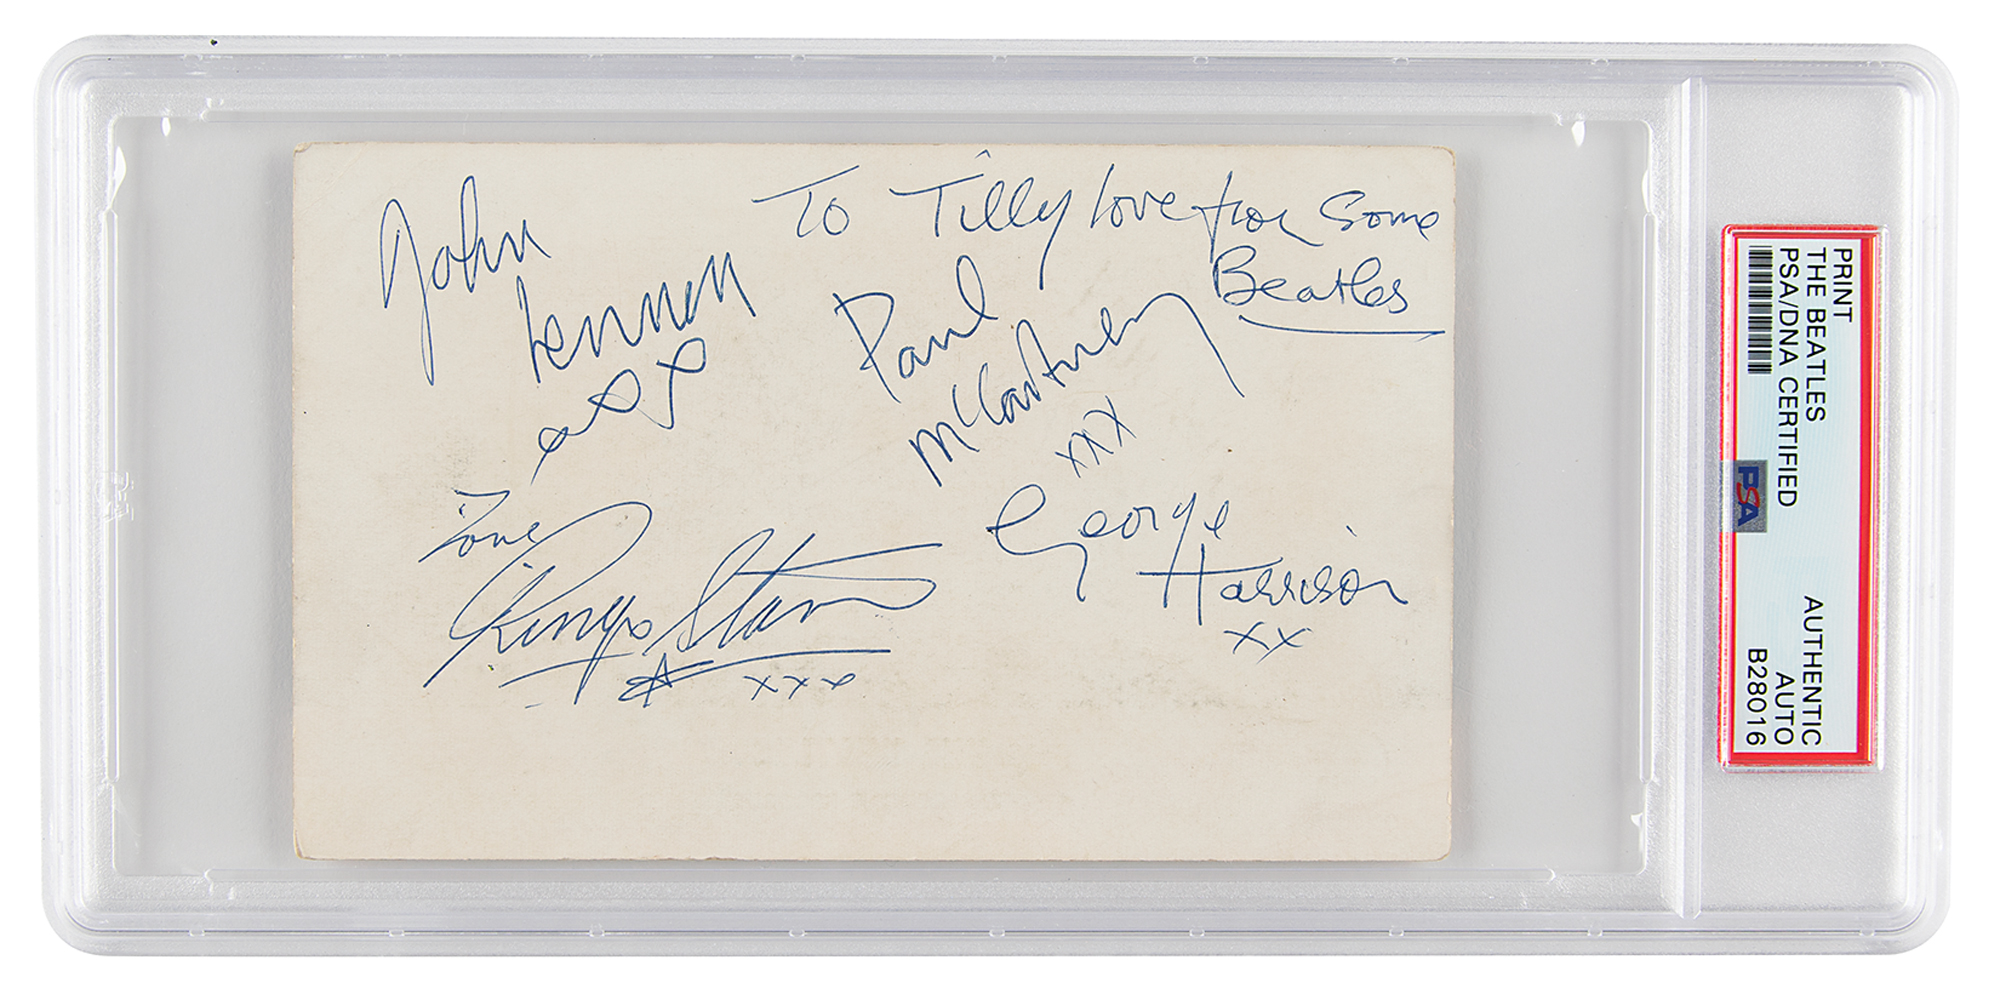 Lot #6472 Beatles Signed Promo Card